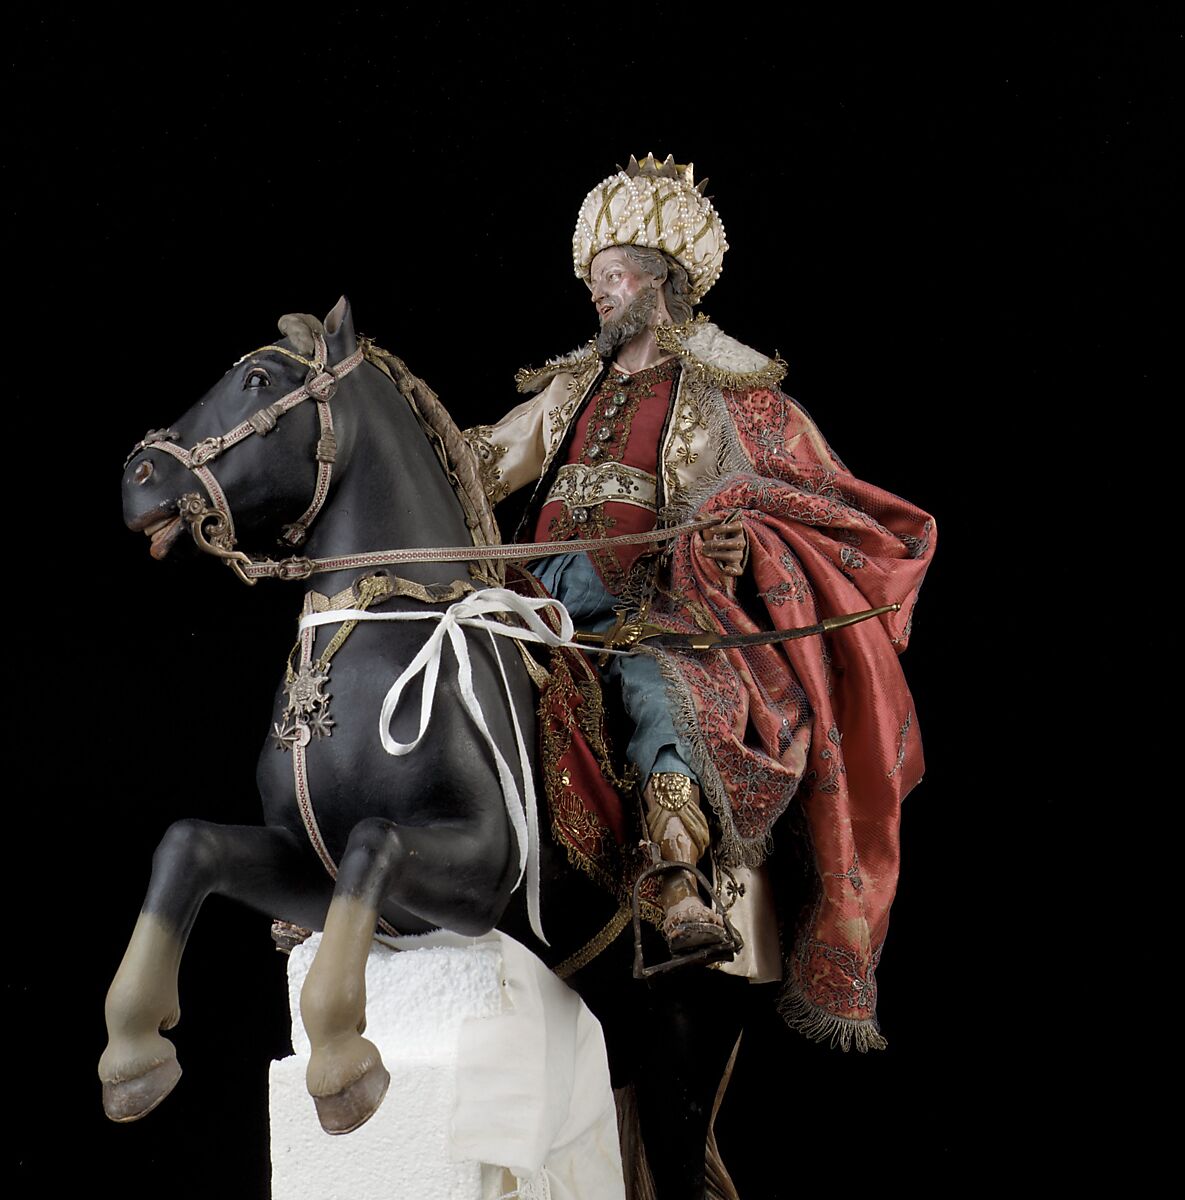 Elderly king, Polychromed terracotta head and wooden limbs; body of wire wrapped in tow; silk and satin garments; silver and gold metallic thread; glass buttons; silver-gilt sword, hilt and crown; leather sheath